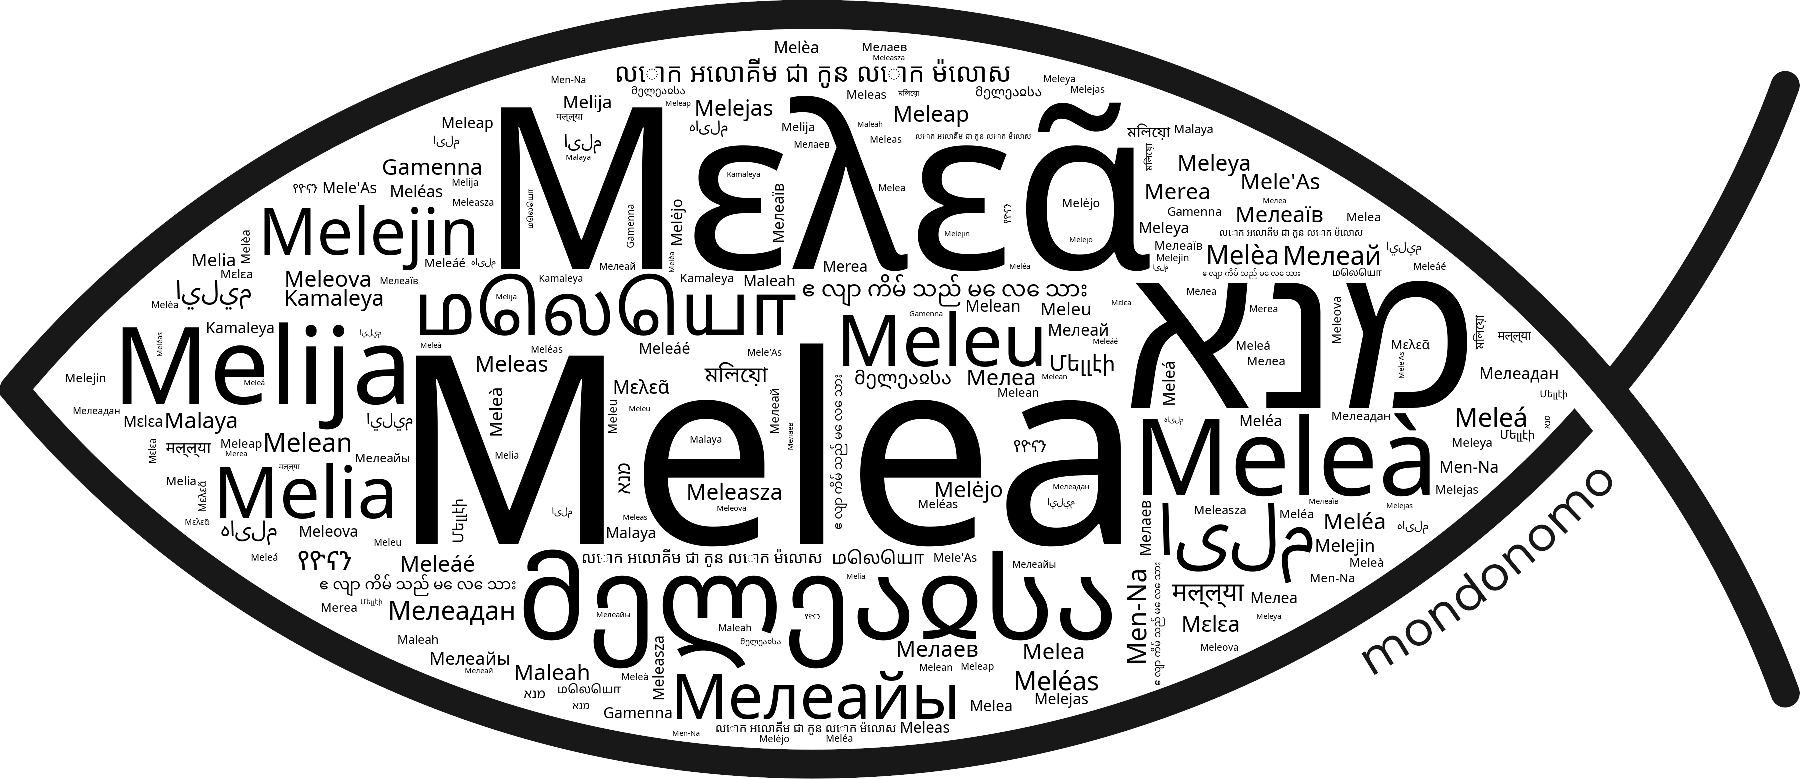 Name Melea in the world's Bibles